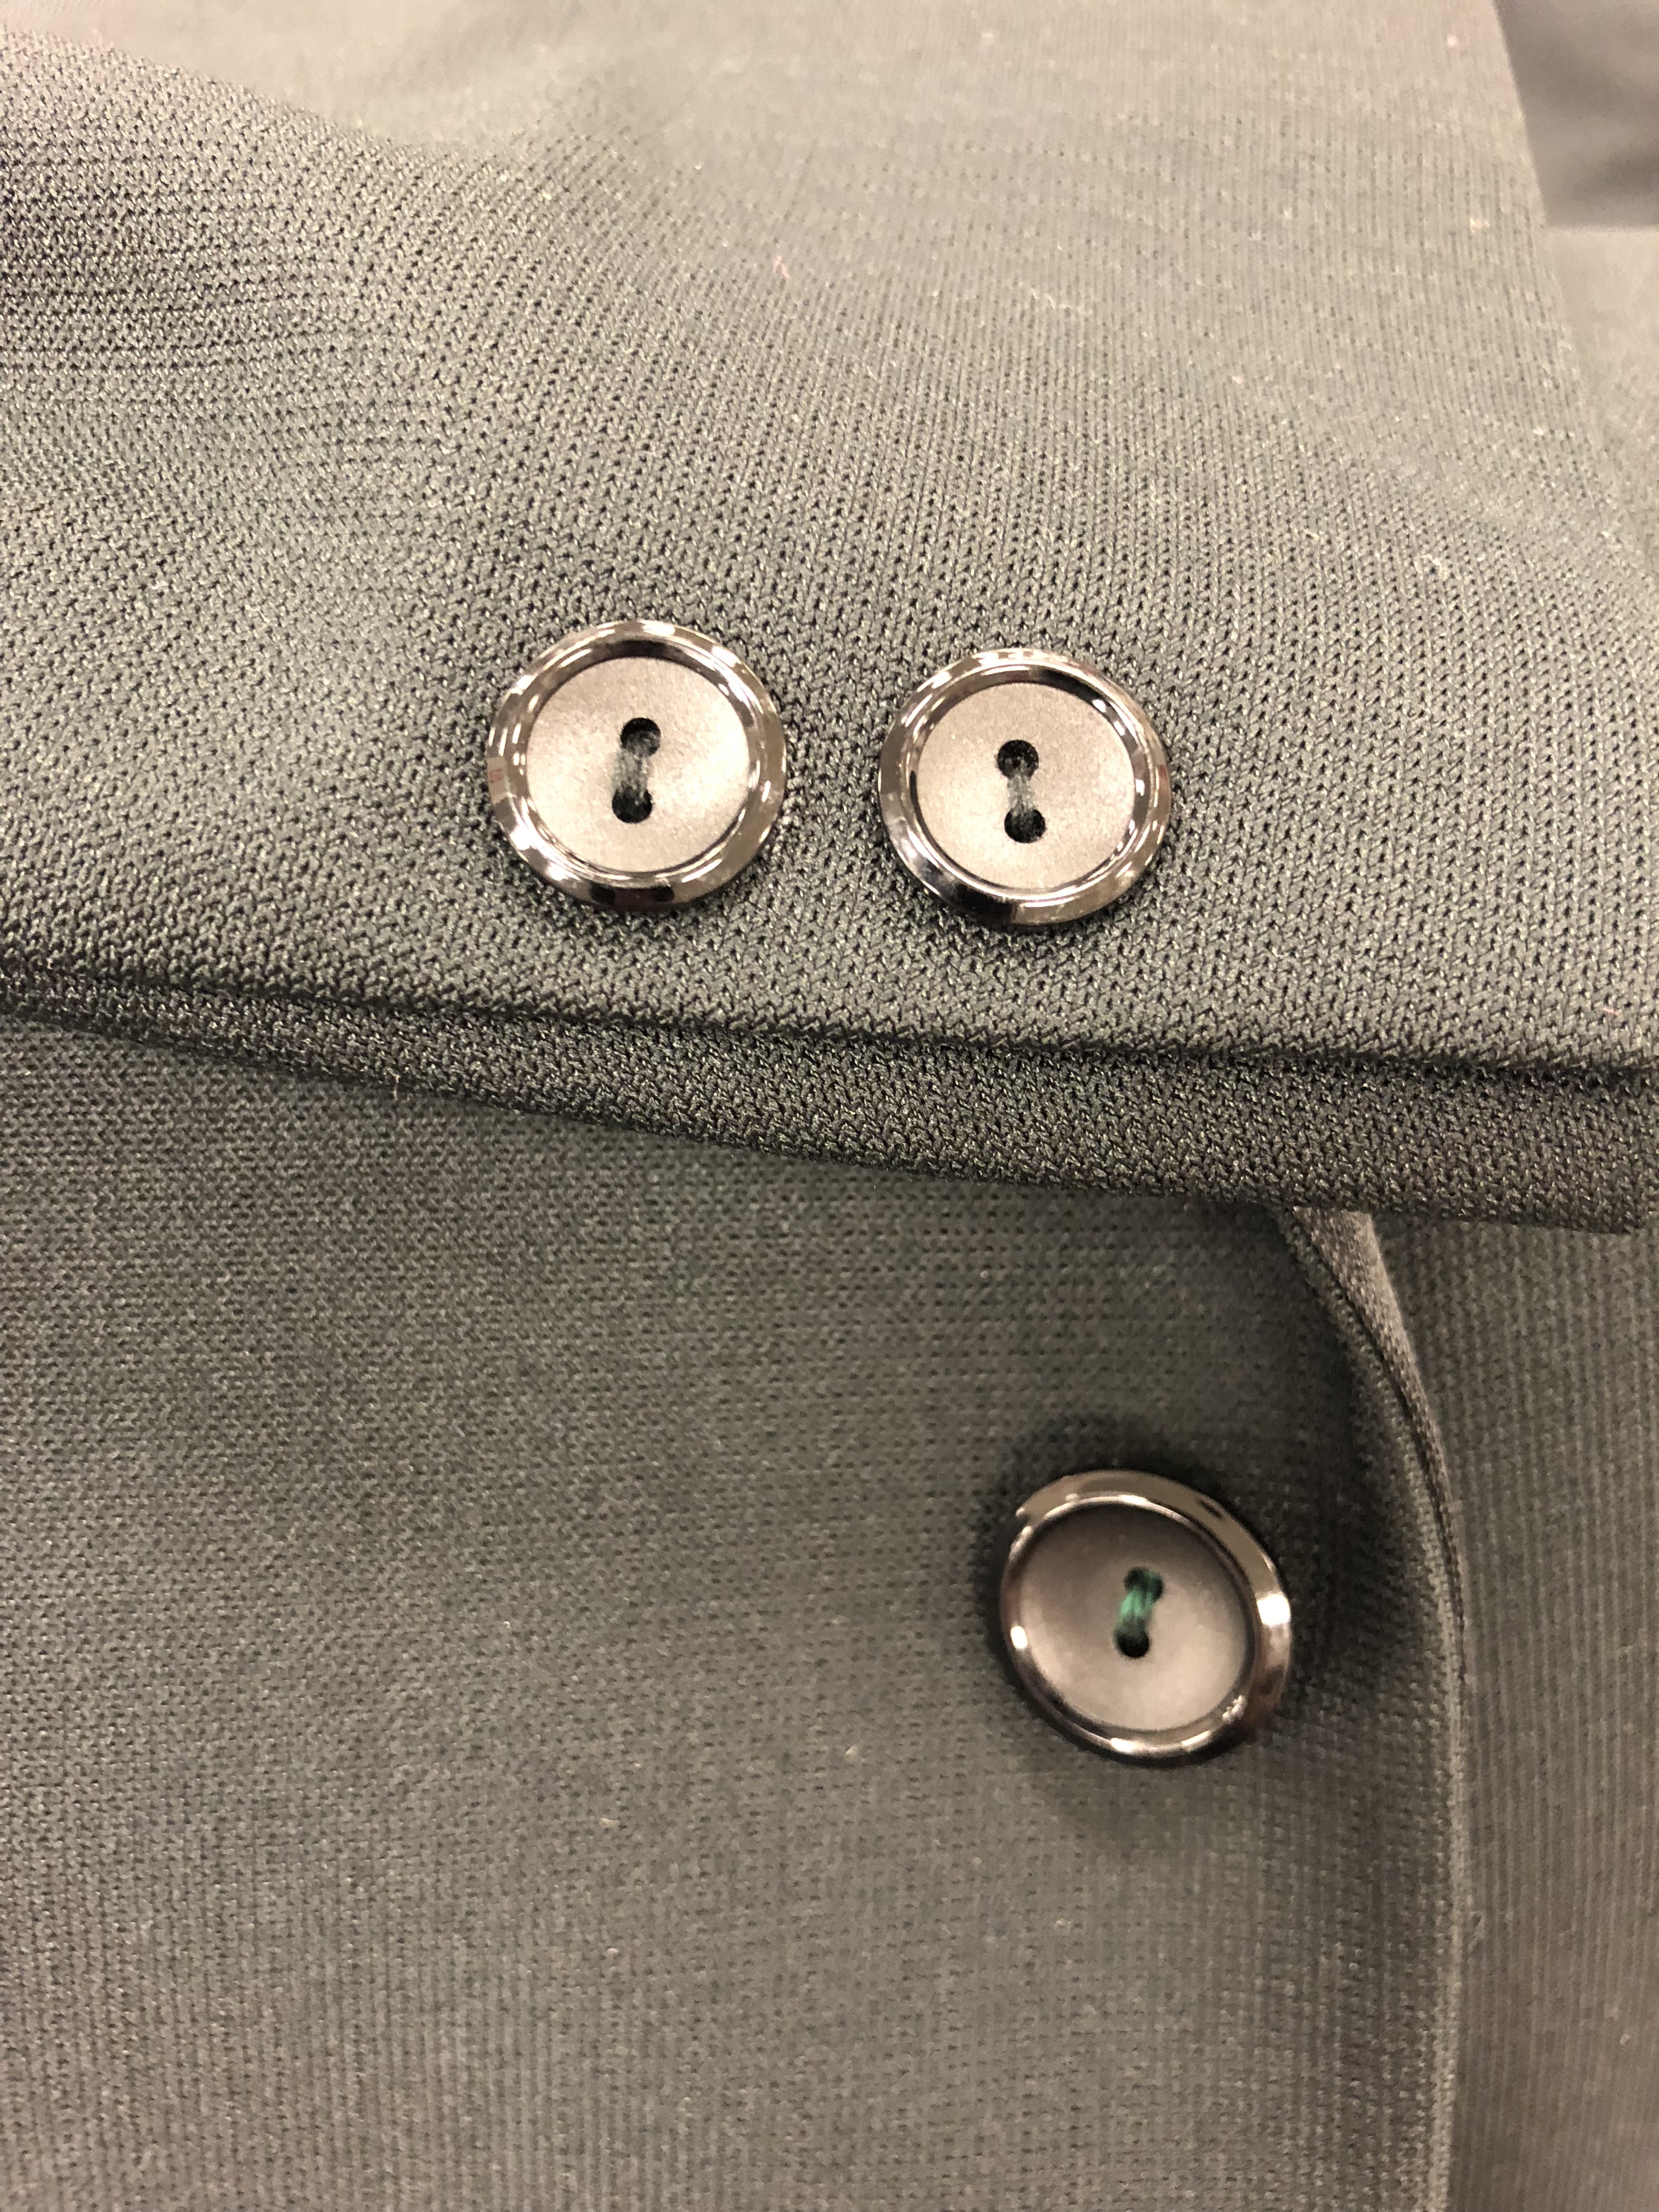 www.theGenuineGentleman.com Suit Quality Hallmarks - Two Hole Button